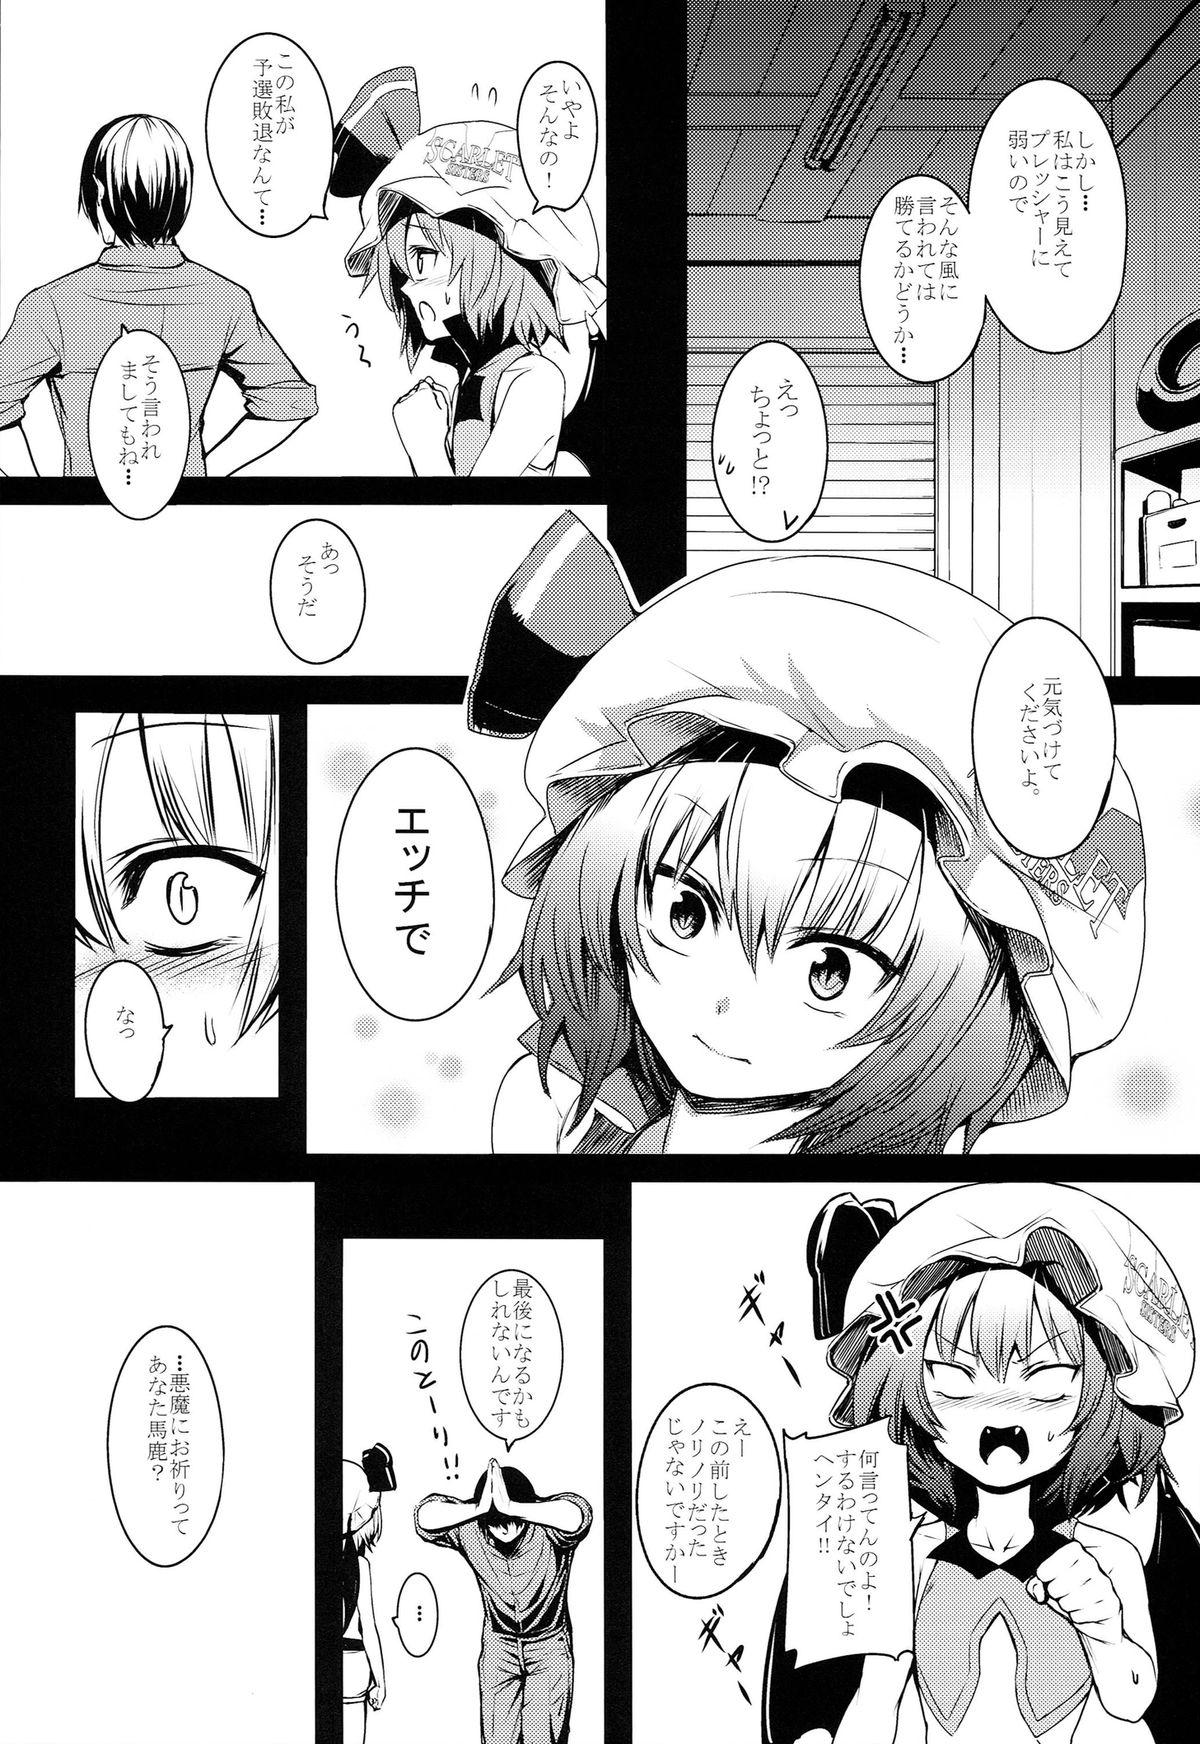 Gay Pissing TOUHOU RACE QUEENS COLLABO CLUB - Touhou project Amateur - Page 5